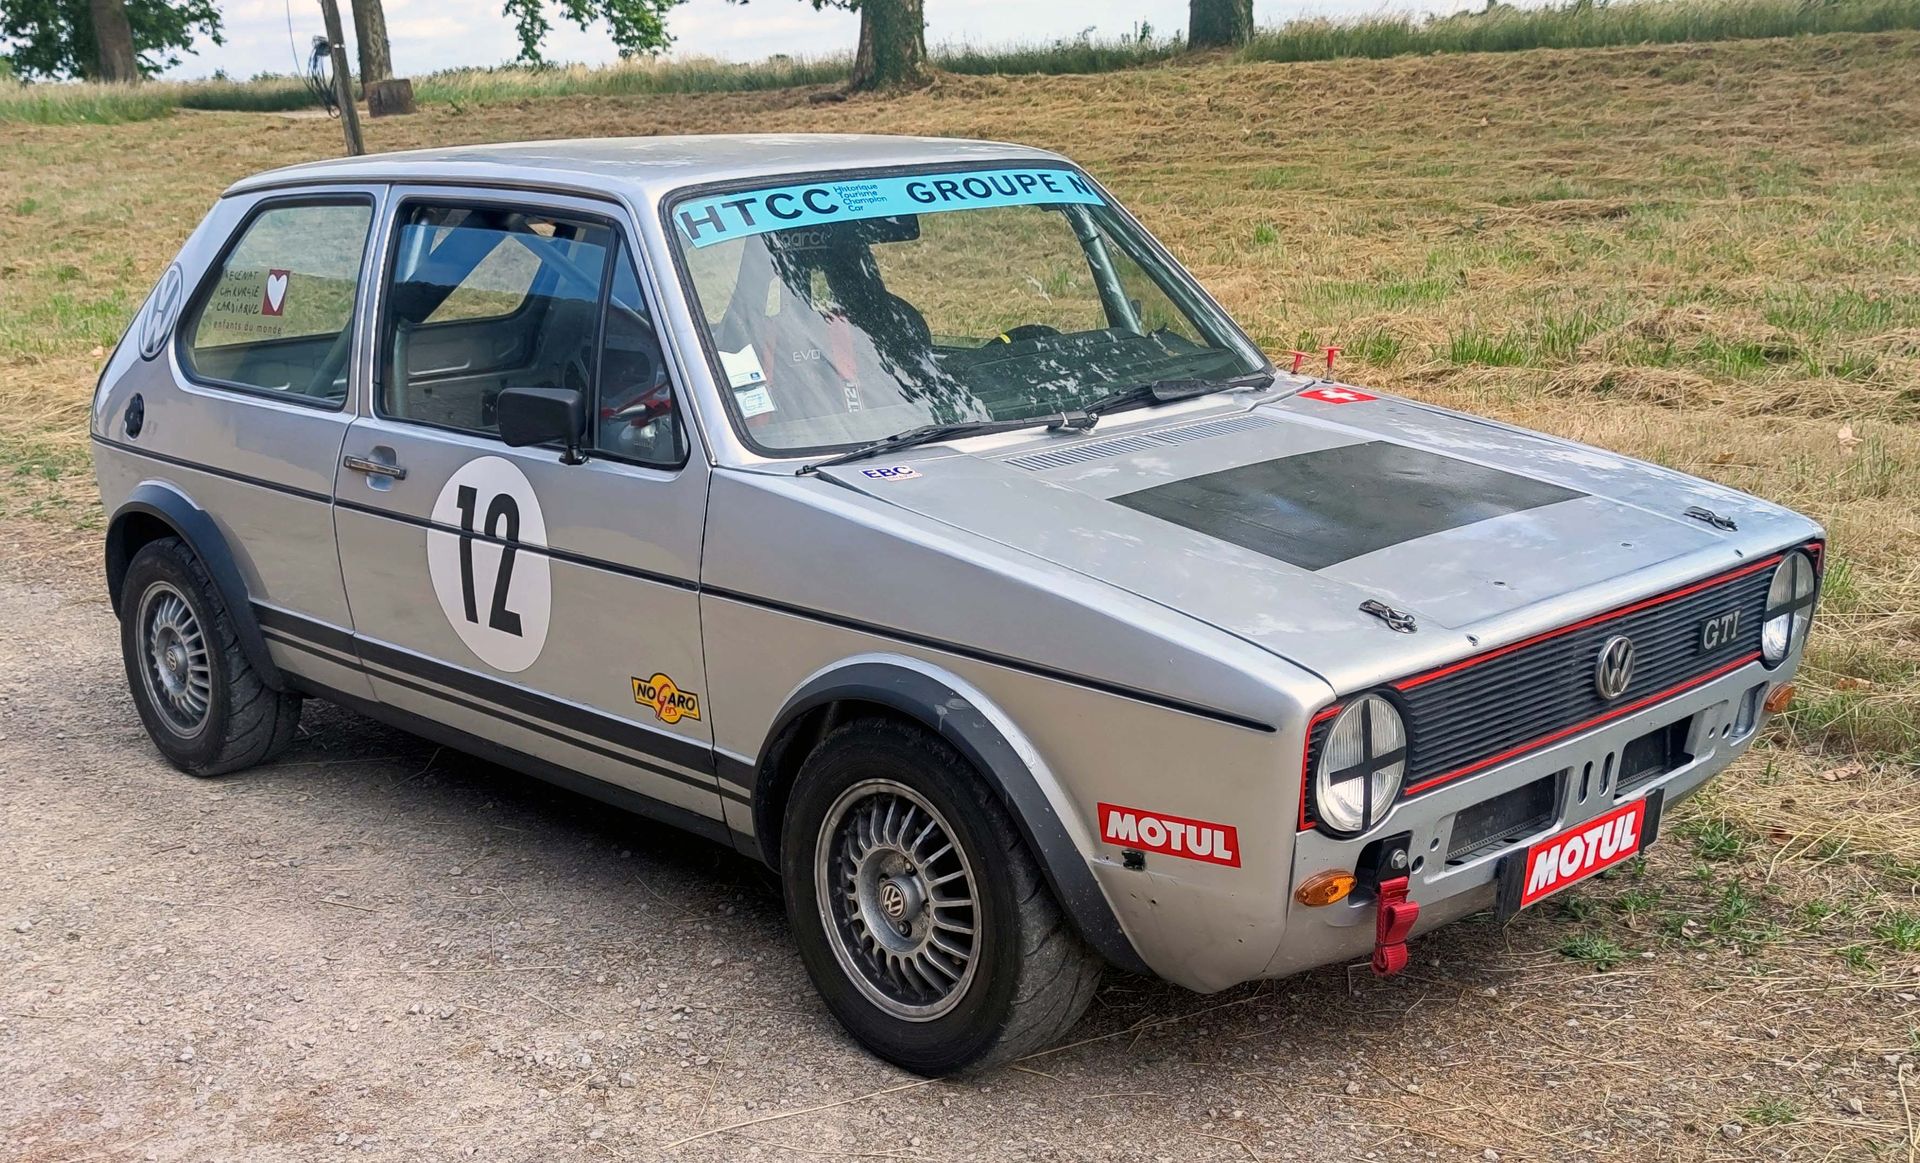 GOLF GTI Série 1 – 1980 This icon of the 75/80's youth is equipped for competiti&hellip;